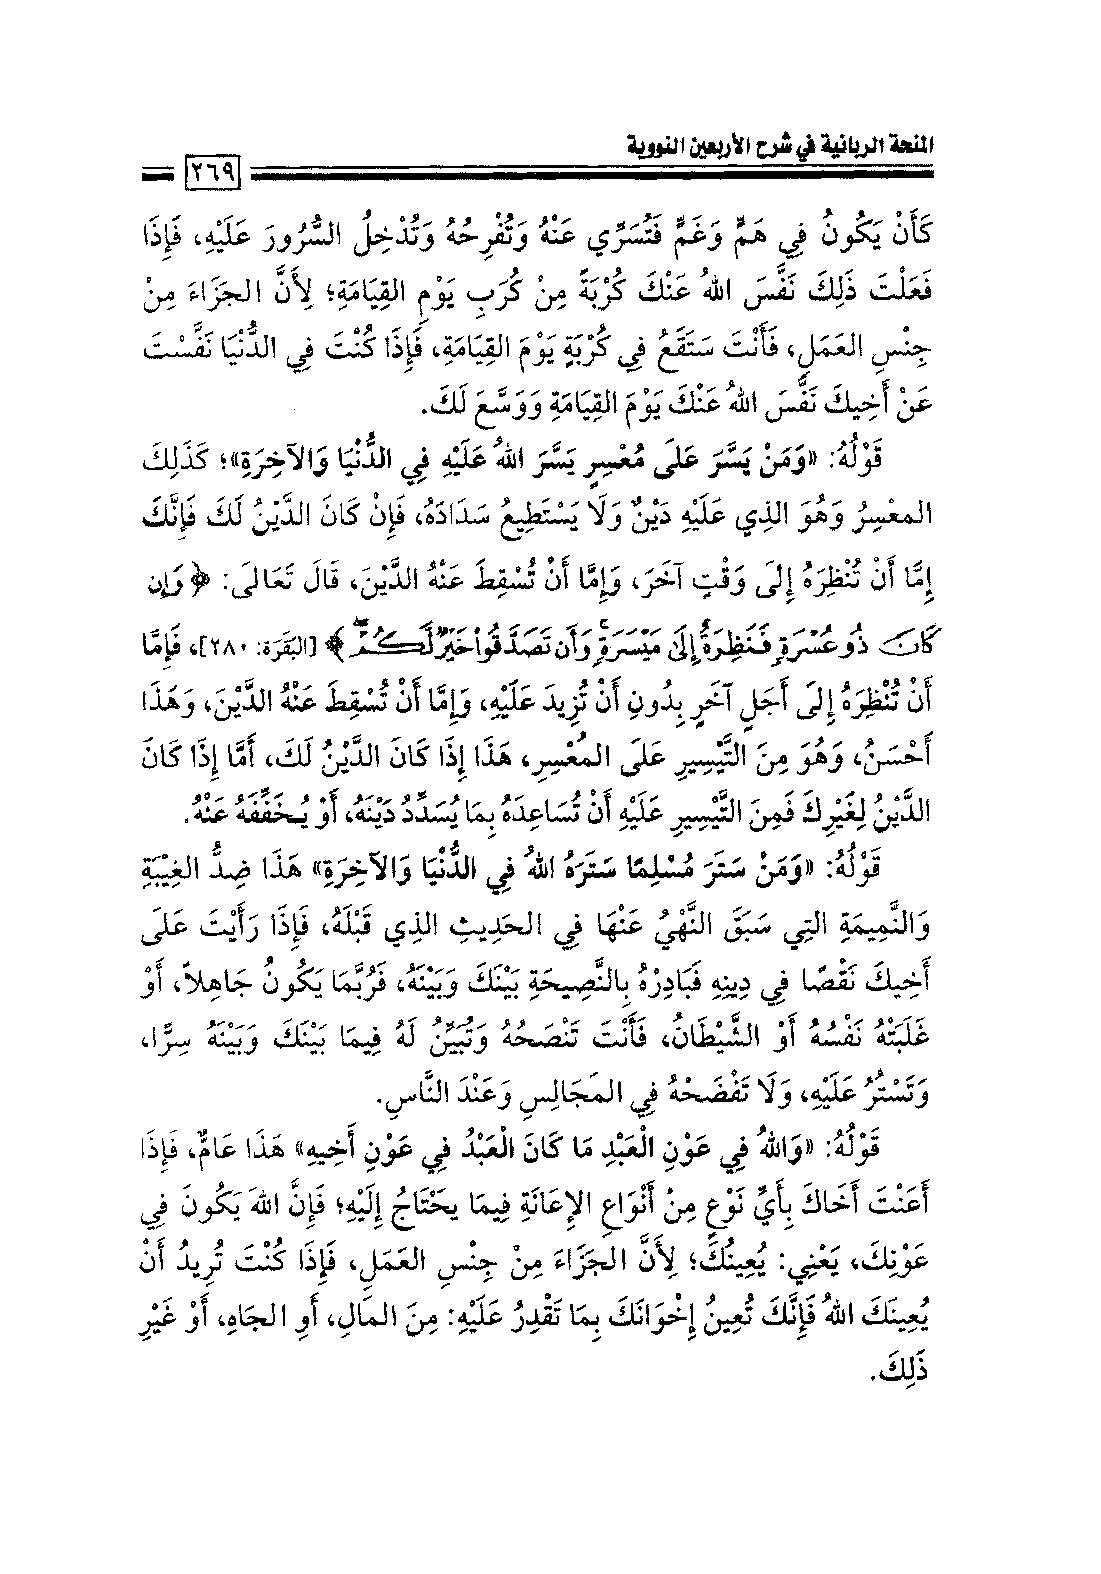 Page 271